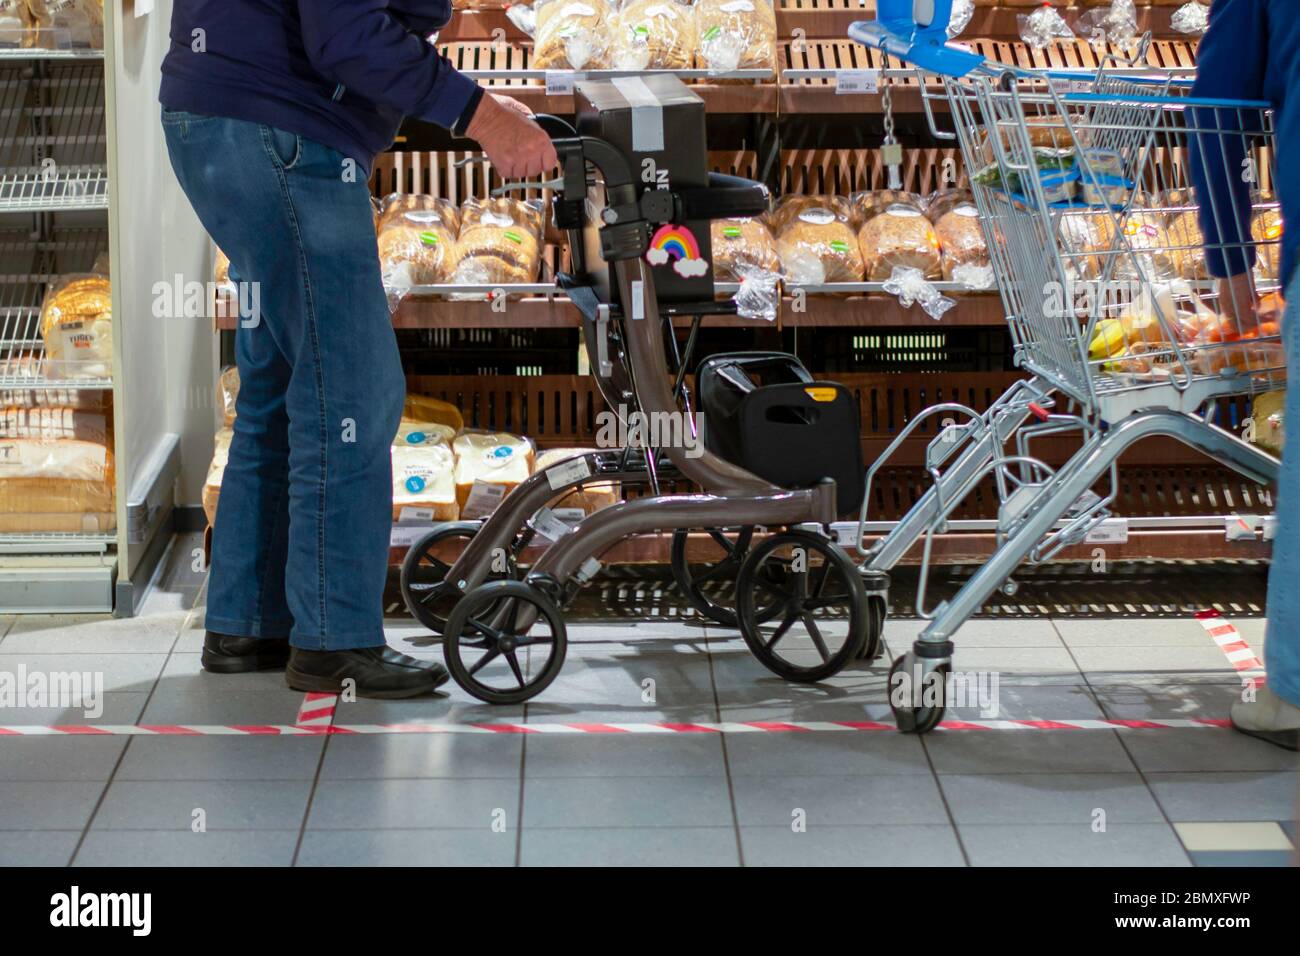 Elderly man doing groceries together in a supermarket during coronavirus covid-19 pandemic. Tape on the ground indicates the safe social distance Stock Photo